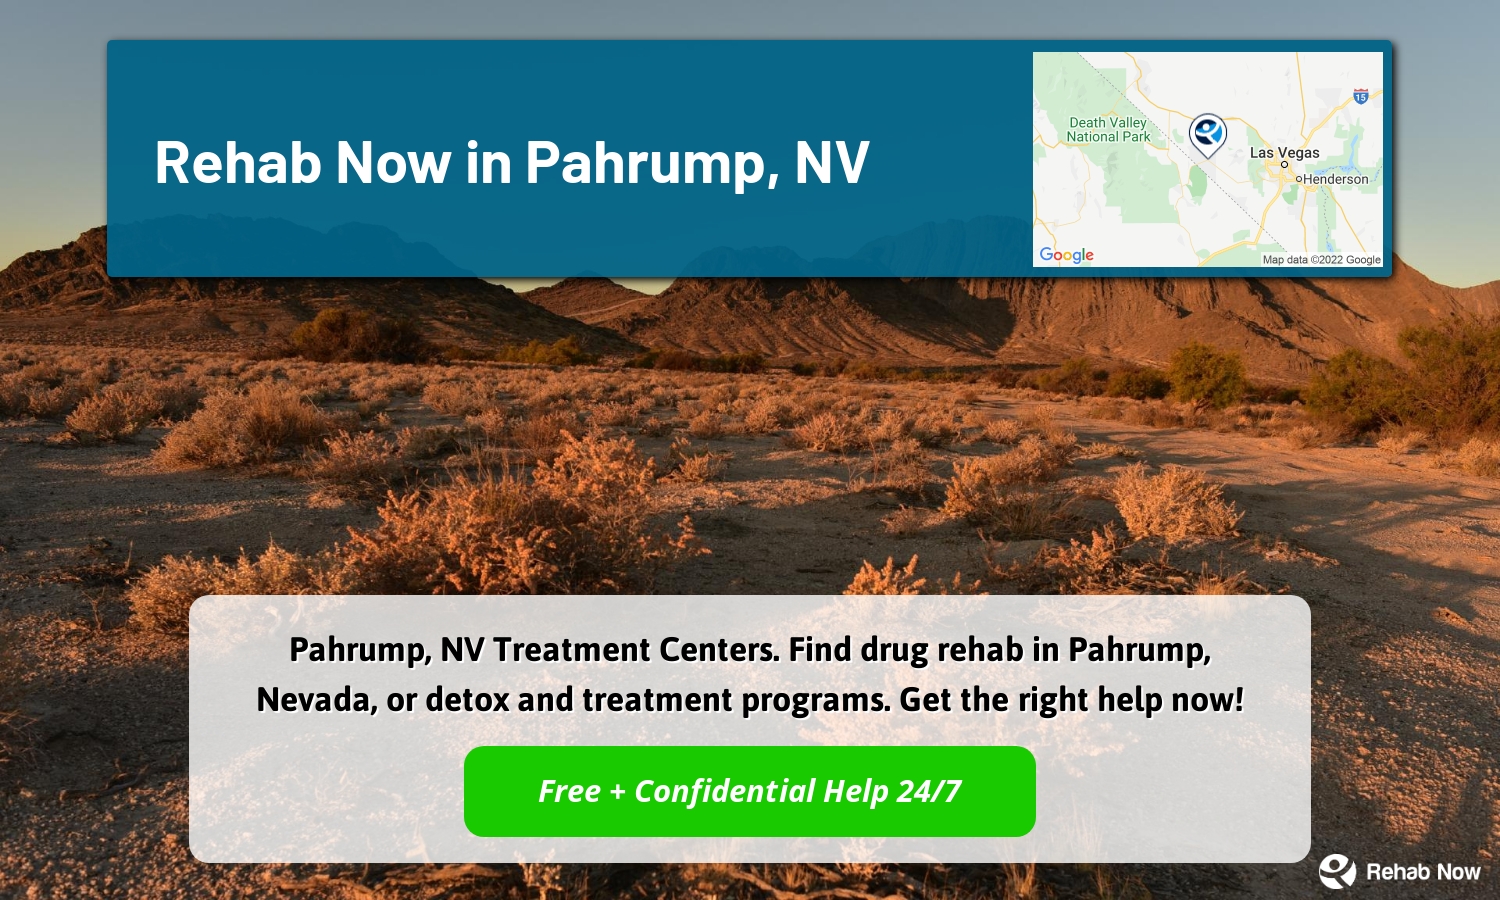 Pahrump, NV Treatment Centers. Find drug rehab in Pahrump, Nevada, or detox and treatment programs. Get the right help now!